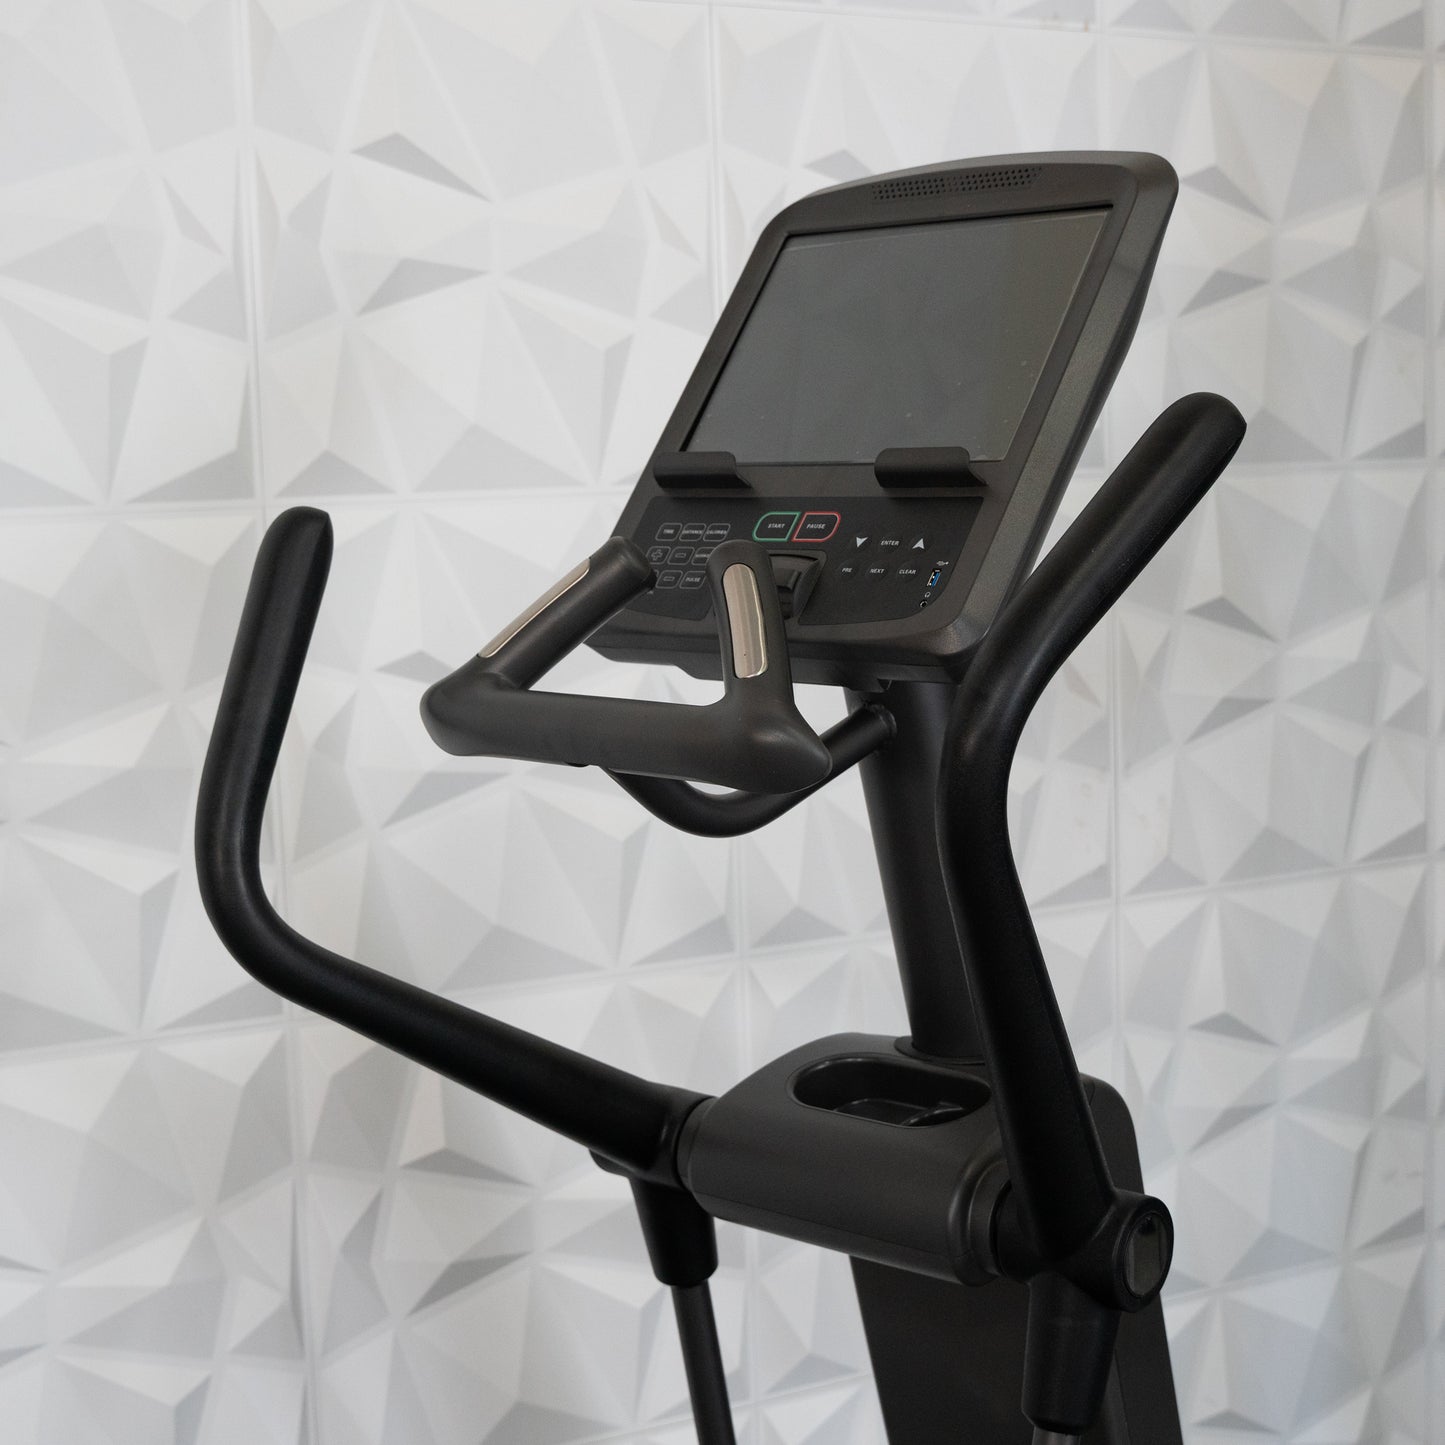 Commercial Elliptical Trainer - Touch Screen